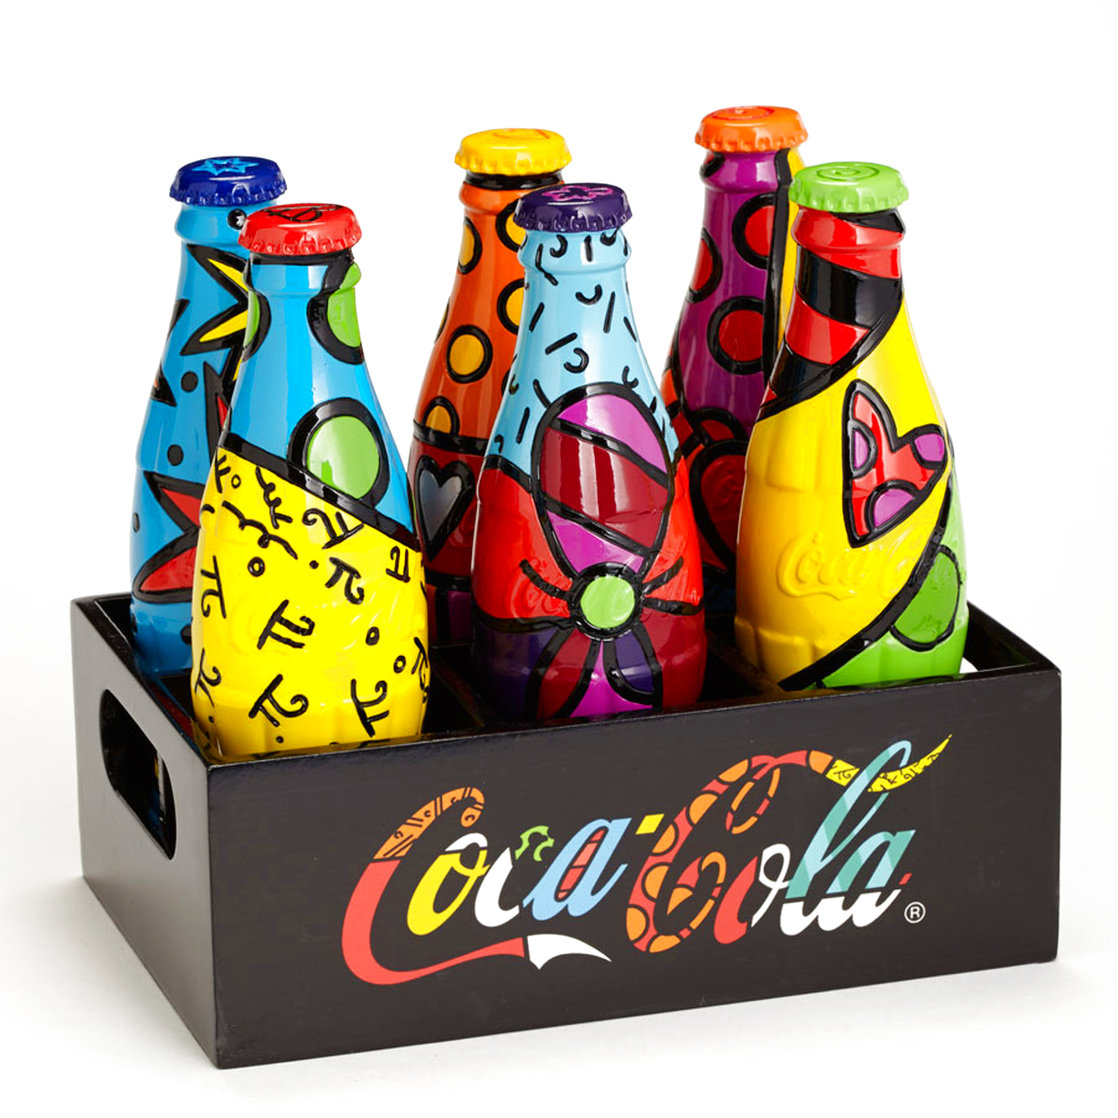 Romero Britto Numbered Limited Edition Coke Bottle Set With Crate 2014 Sculpture by Romero Britto